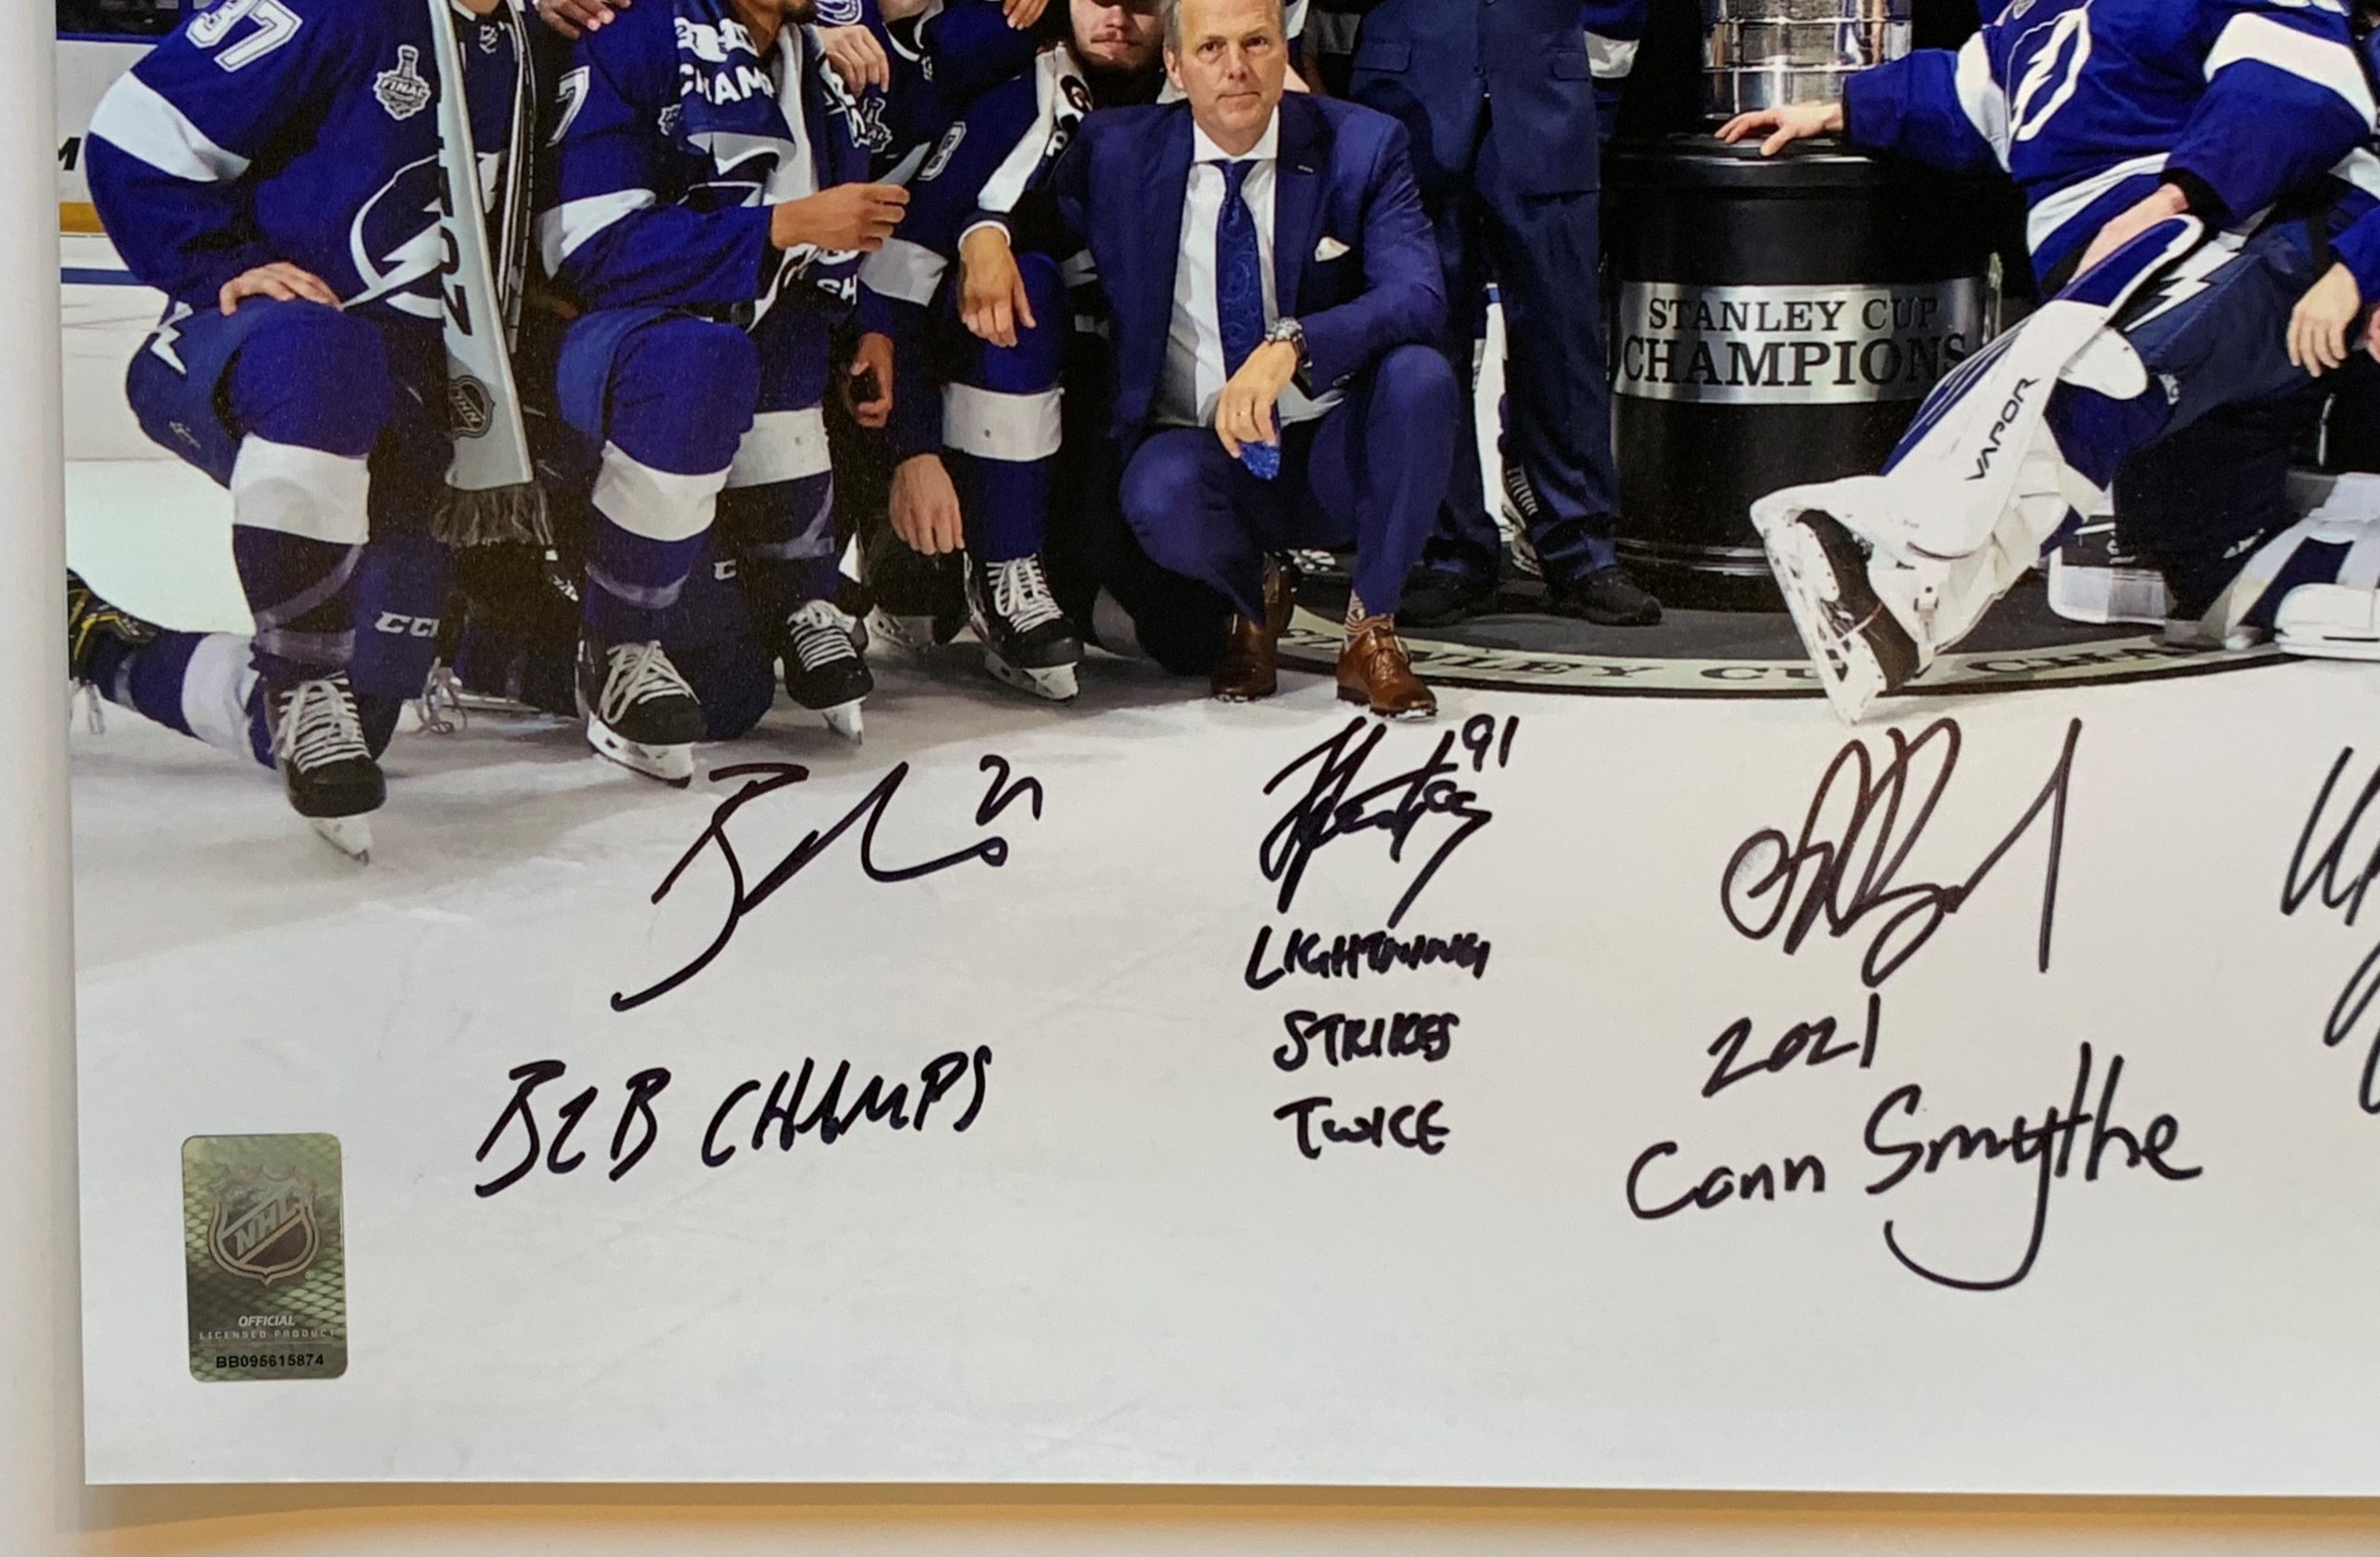 The Tampa Bay Lightning stanley cup champions 2021 signatures